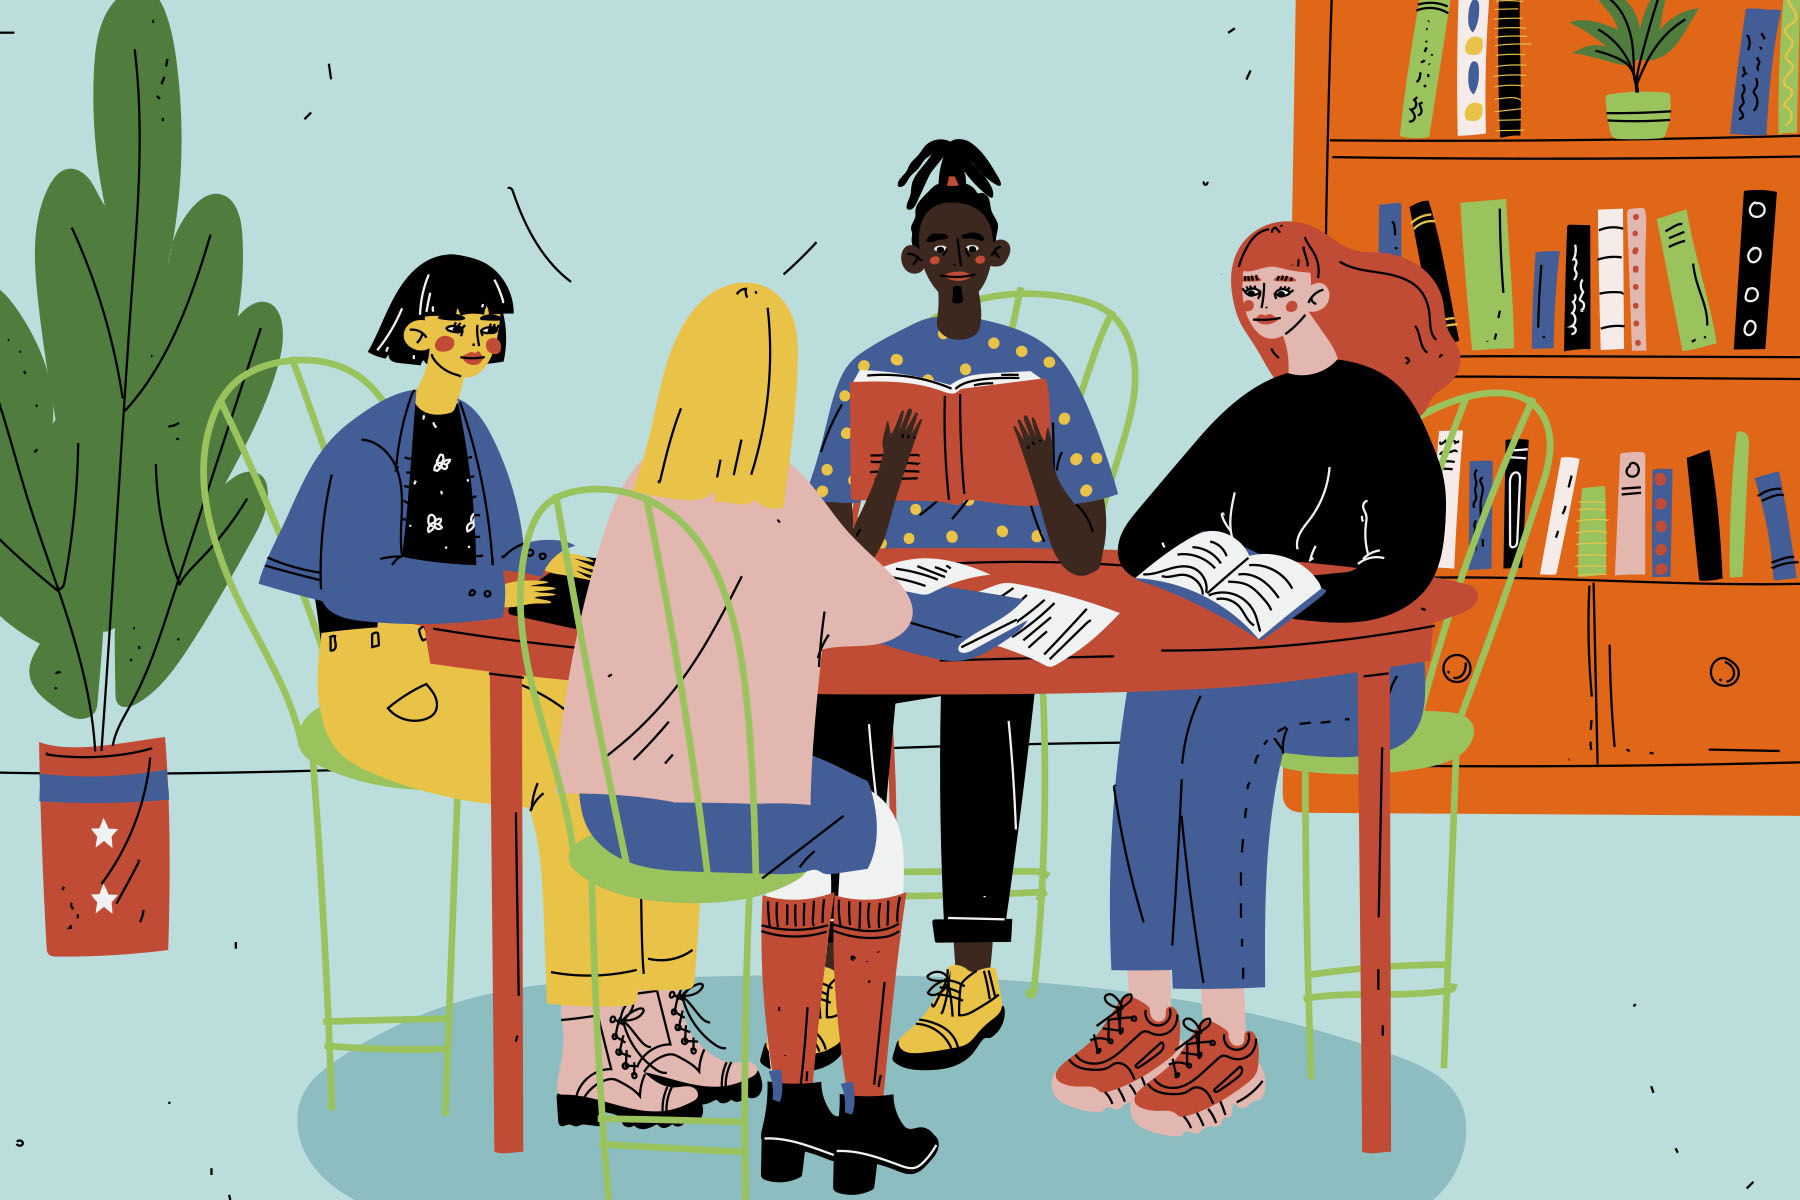 An illustration of a number of people relaxing around a large book